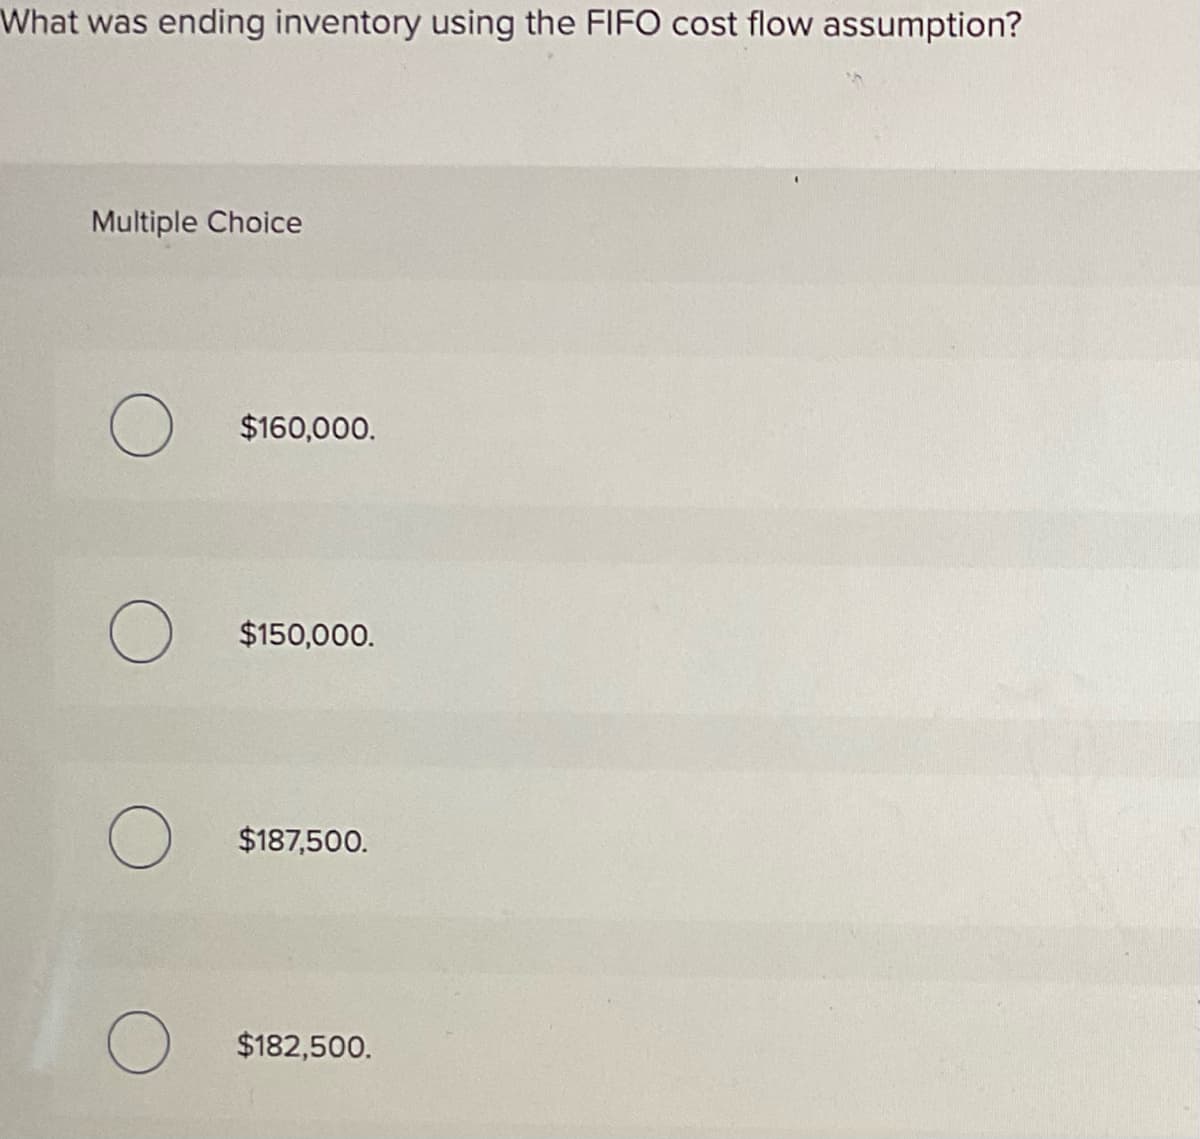 What was ending inventory using the FIFO cost flow assumption?
Multiple Choice
O $160,000.
O $150,000.
O $187,500.
O $182,500.